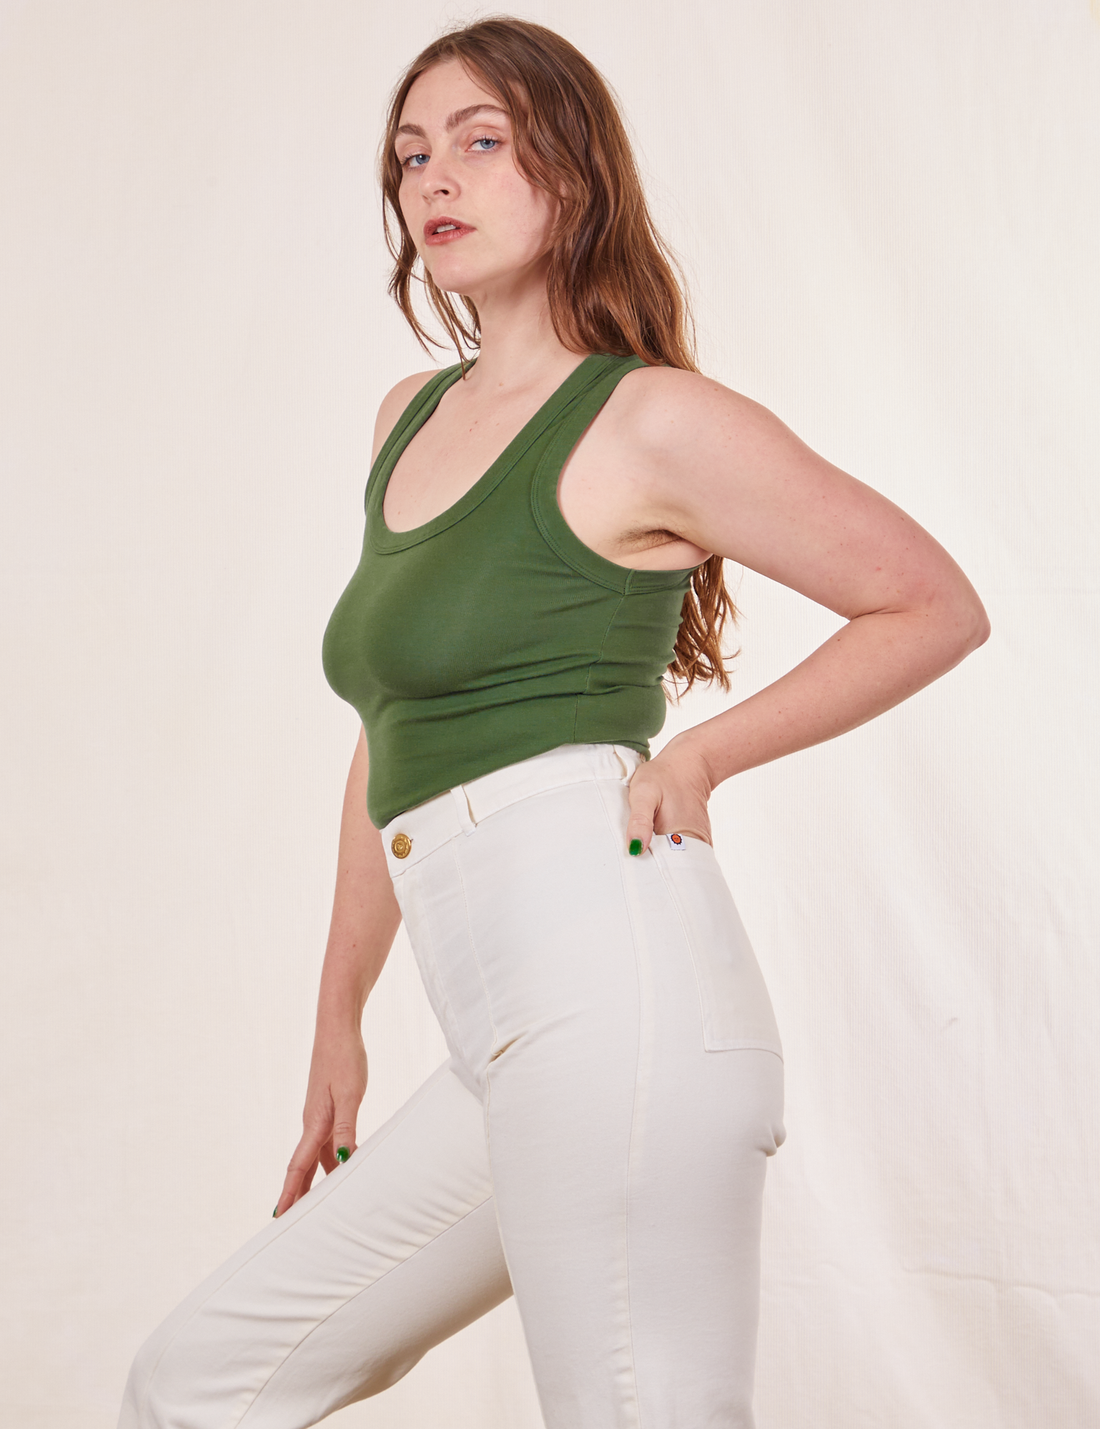 Tank Top in Dark Emerald Green side view on Allison wearing vintage off-white Western Pants. Allison has her hand in the back pocket of pants.